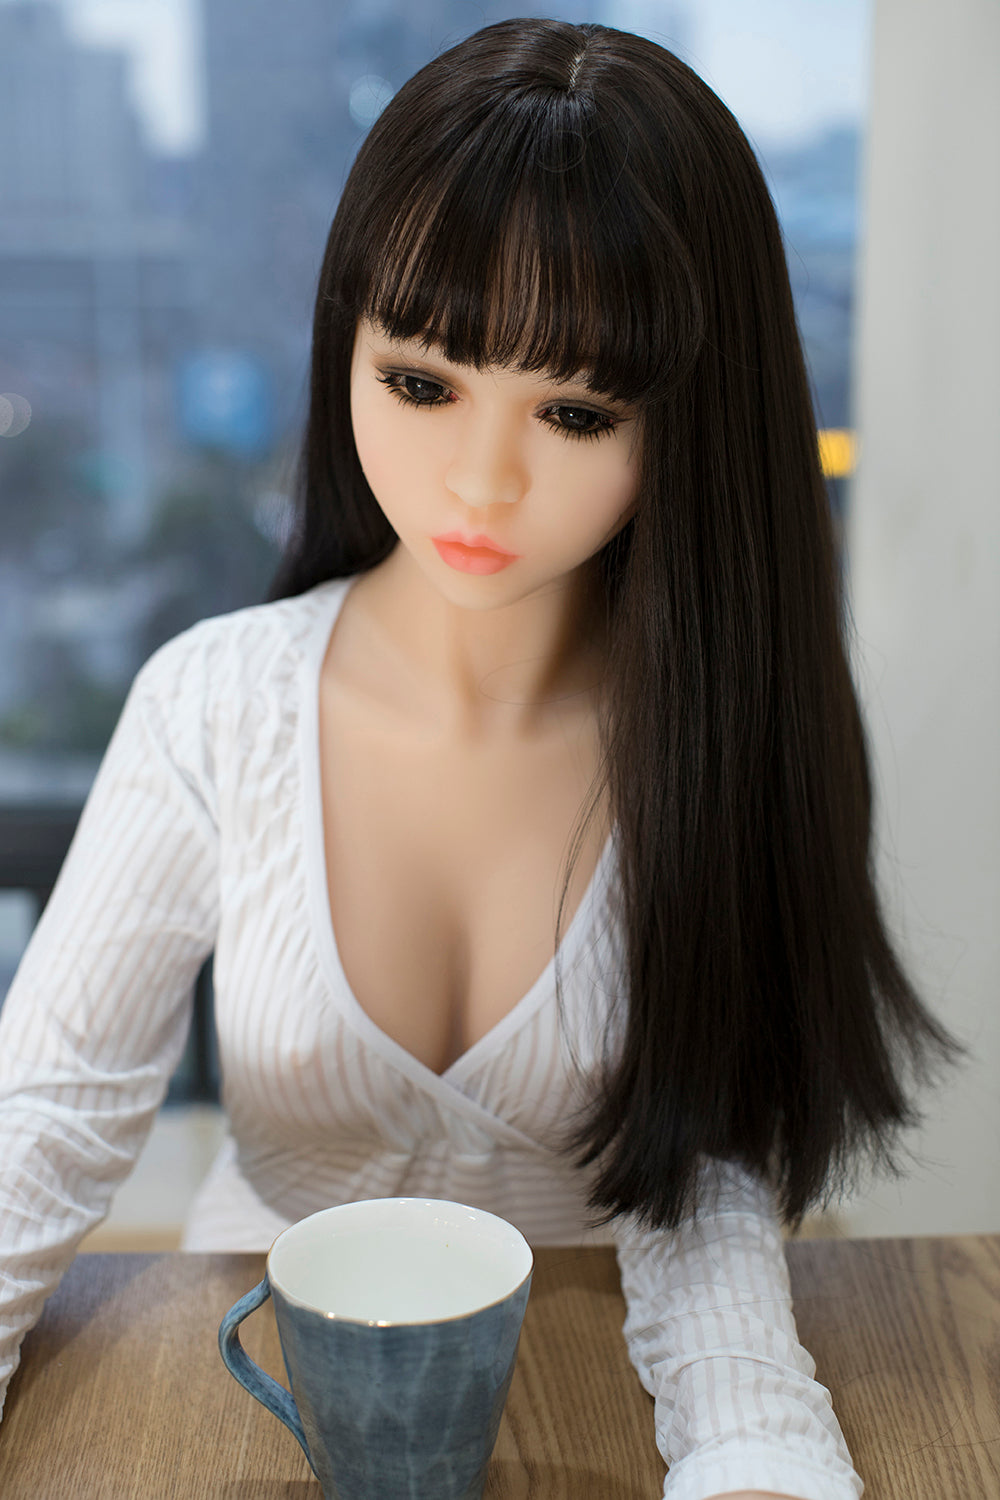 US Stock - Beatrice 158CM #088 Head Cute TPE Sex Doll Realistic Small Breasts Love Doll